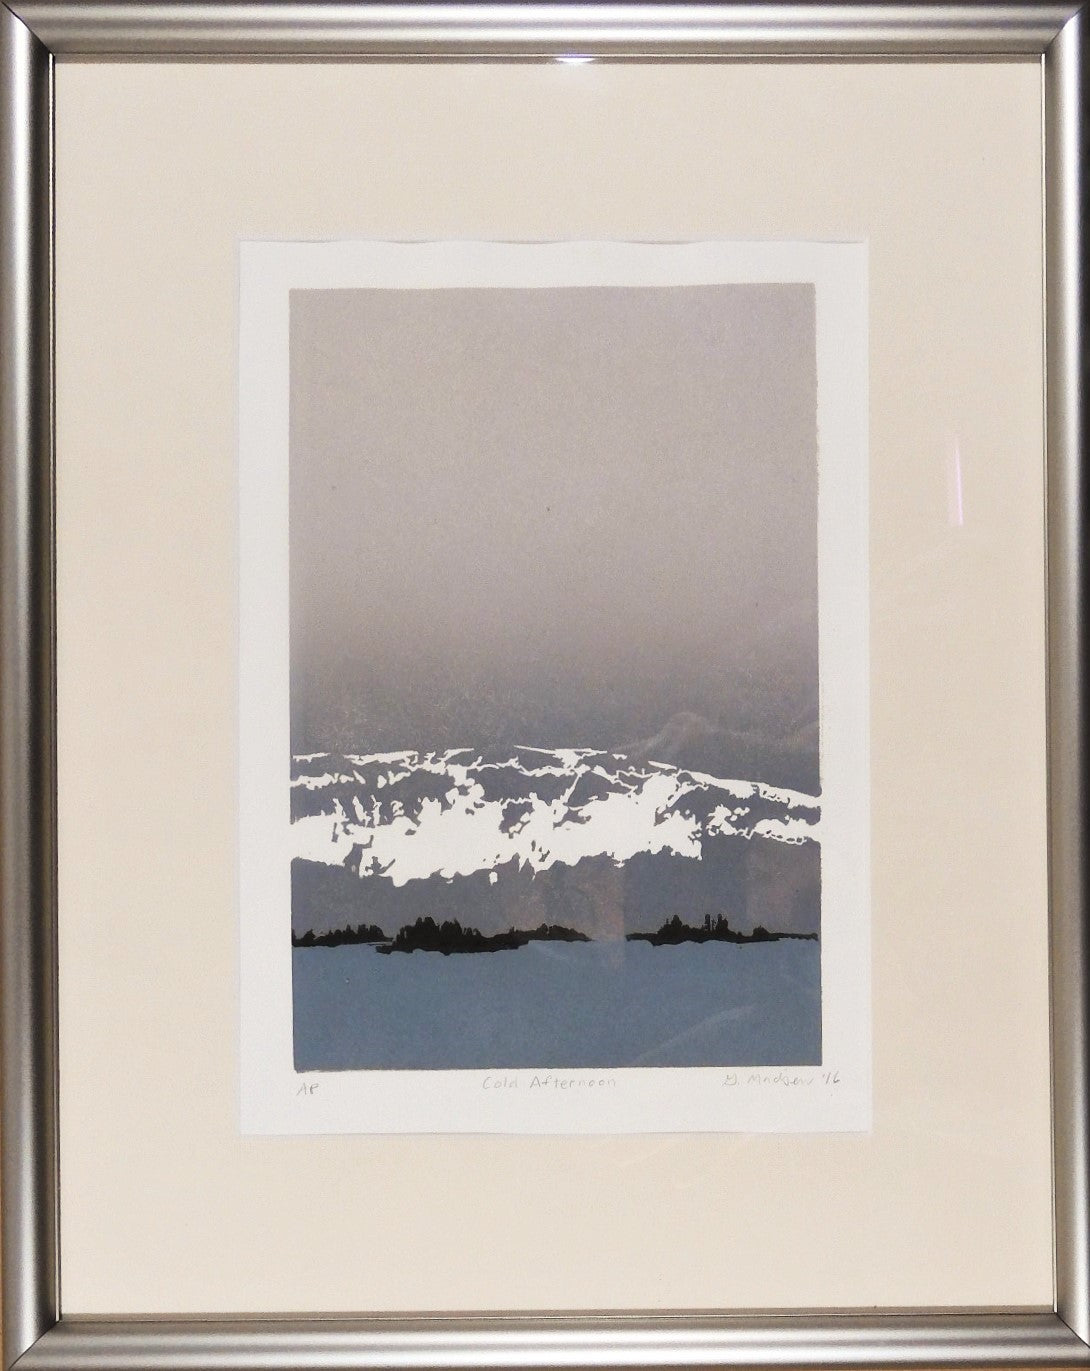 " Cold Afternoon " Framed Original Relief Print Artist: Ginnie Madsen  Original Relief Print  Framed  Matted  Wire hanger  12" x 15"  Snow covered mountain